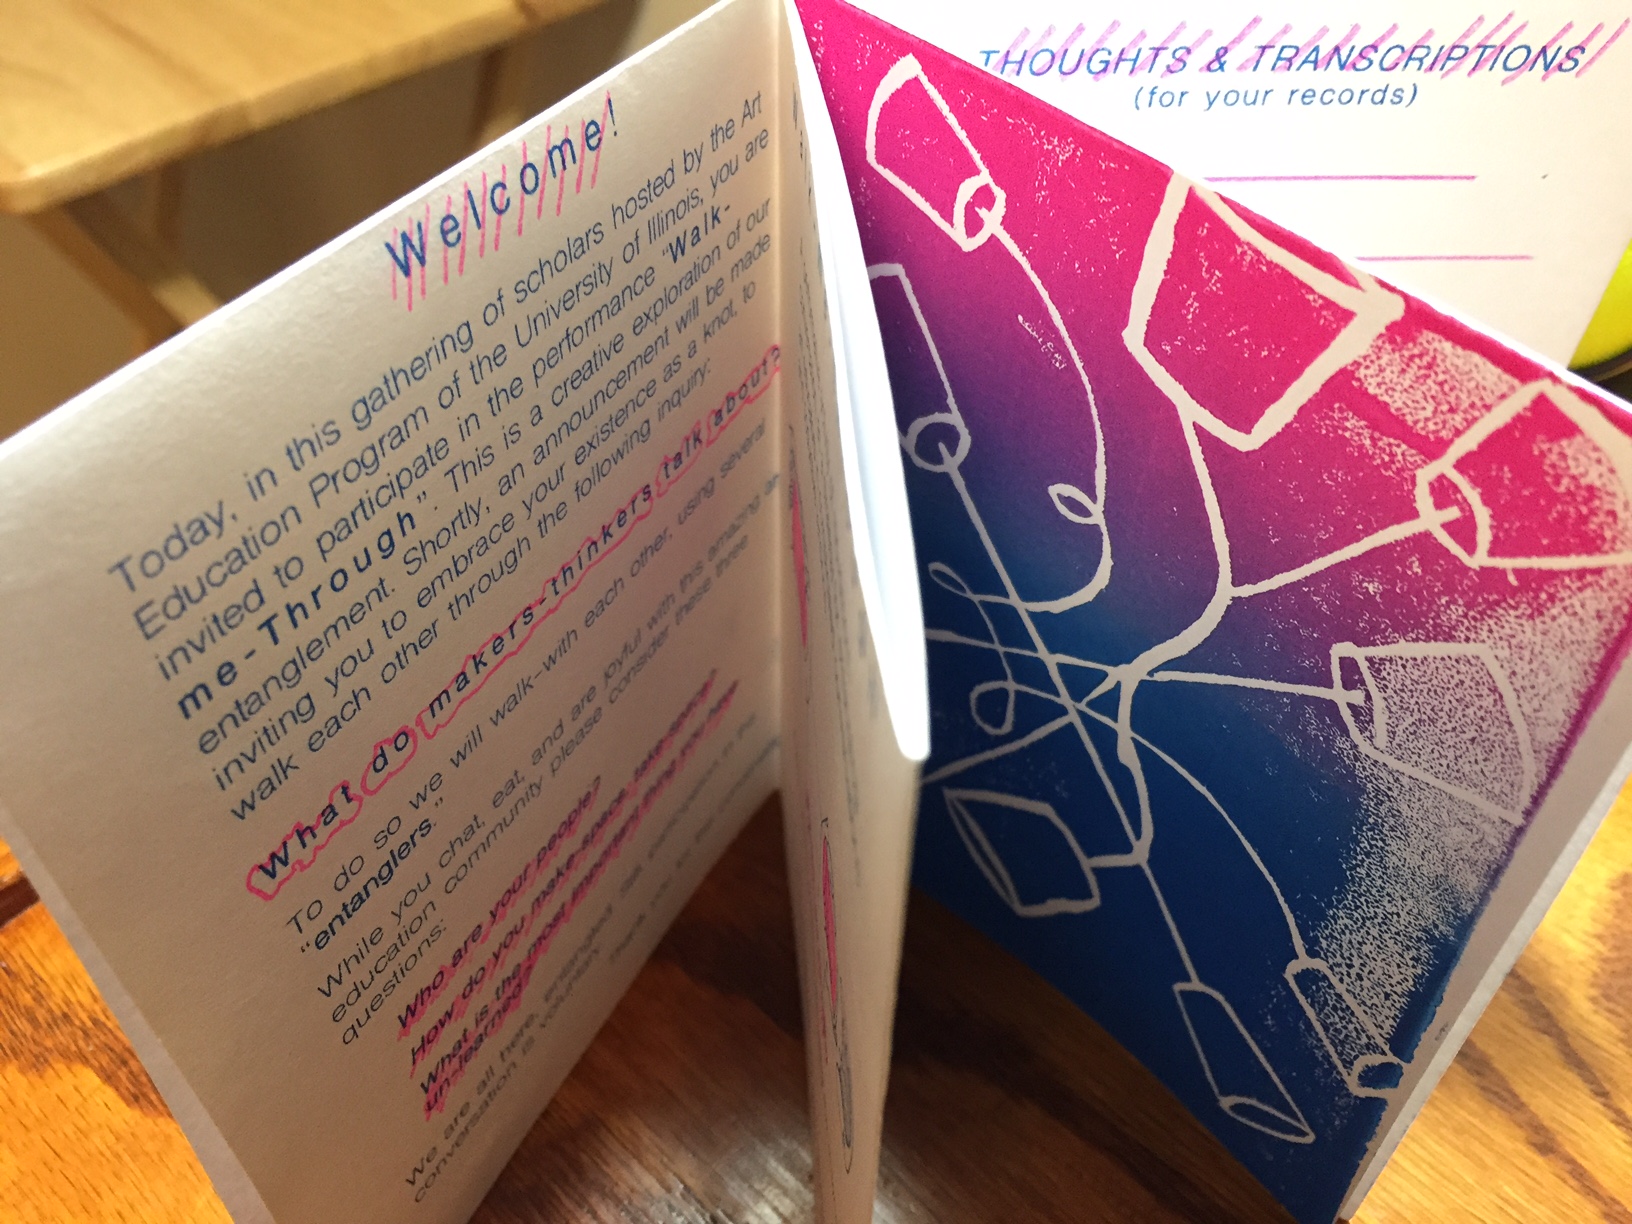 Booklet for "Walk-me-through", May 2018